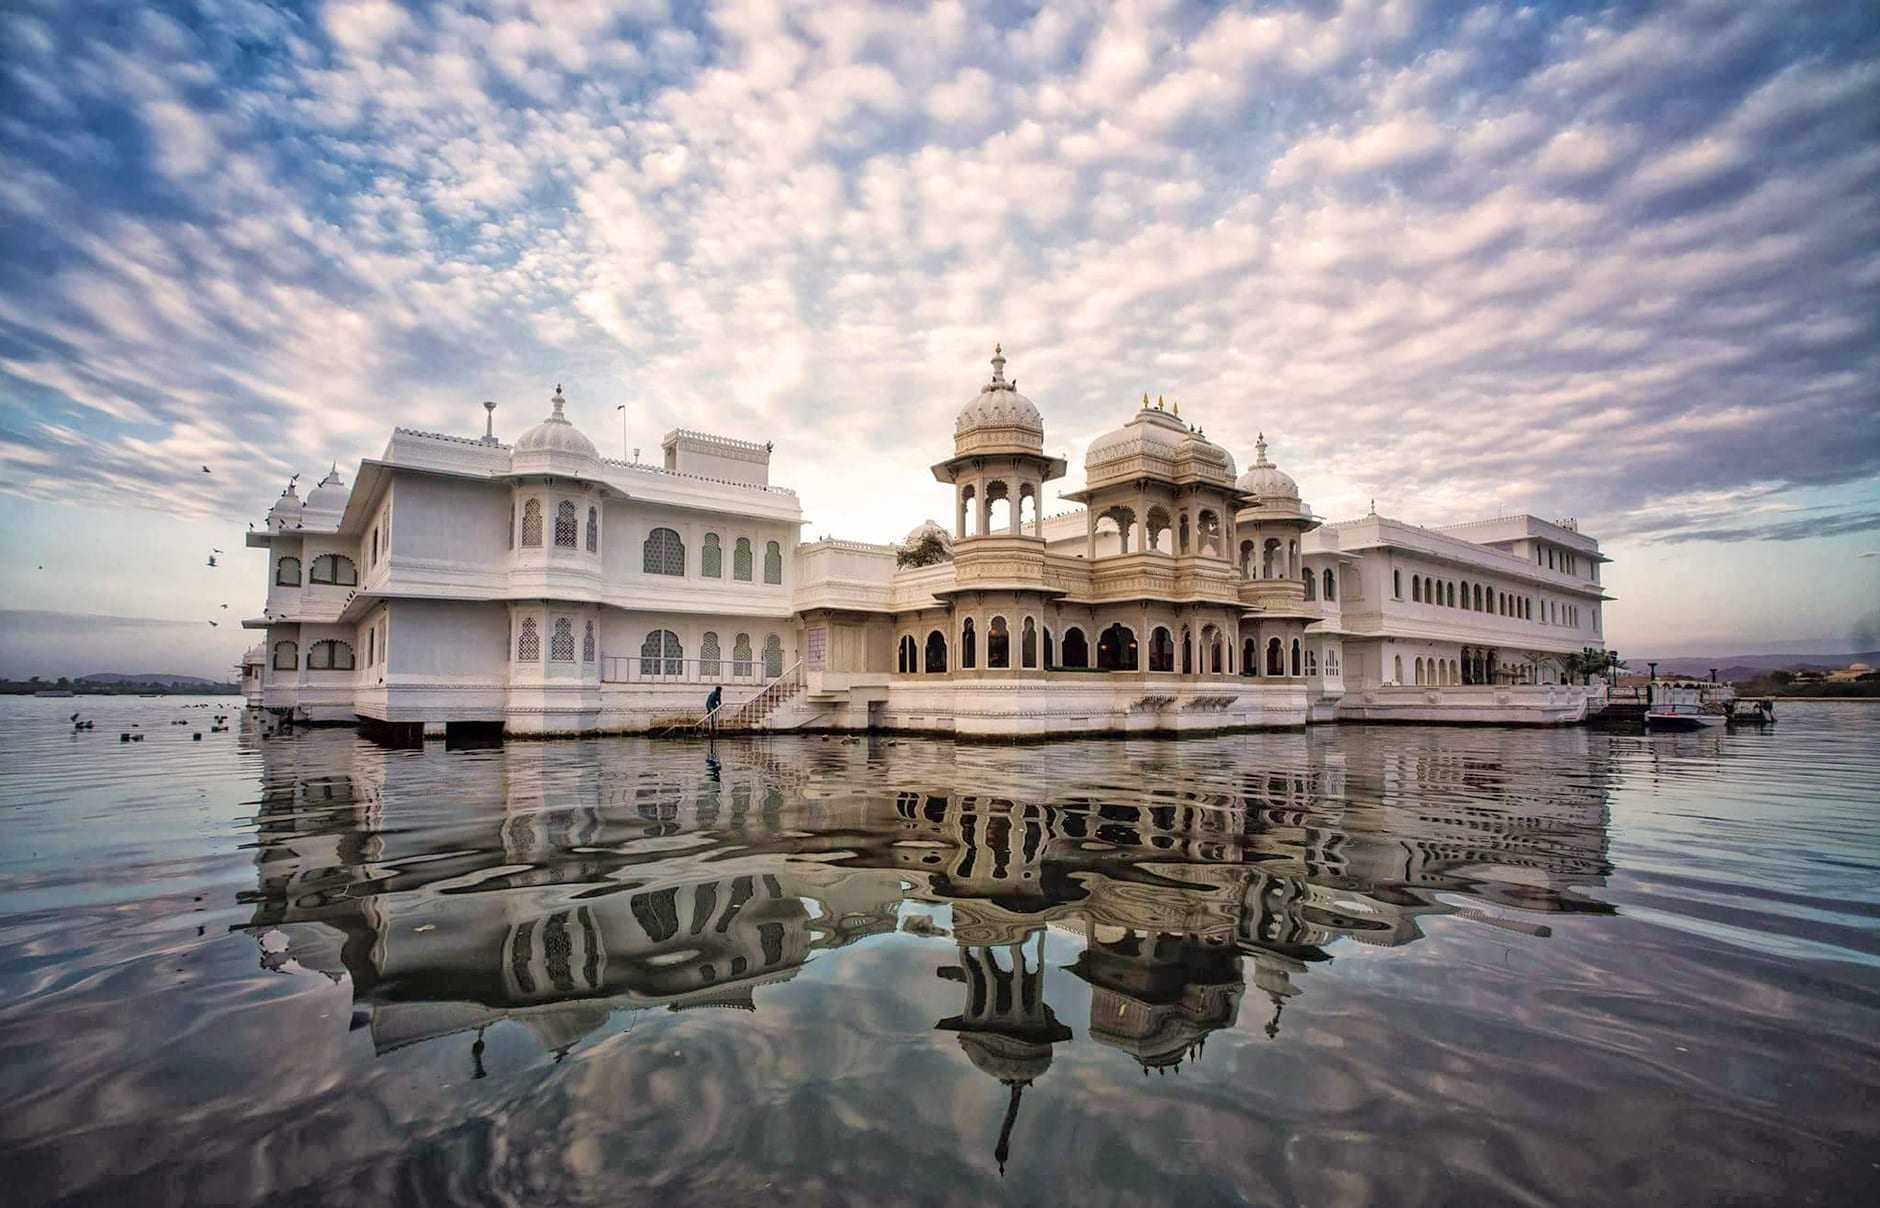 Have you ever wanted to live like a royal? Well, now you can ... for a holiday, at least, at these six hotels that were once palaces like the Taj Lake Palace Hotel. Photo: travelplusstyle.com